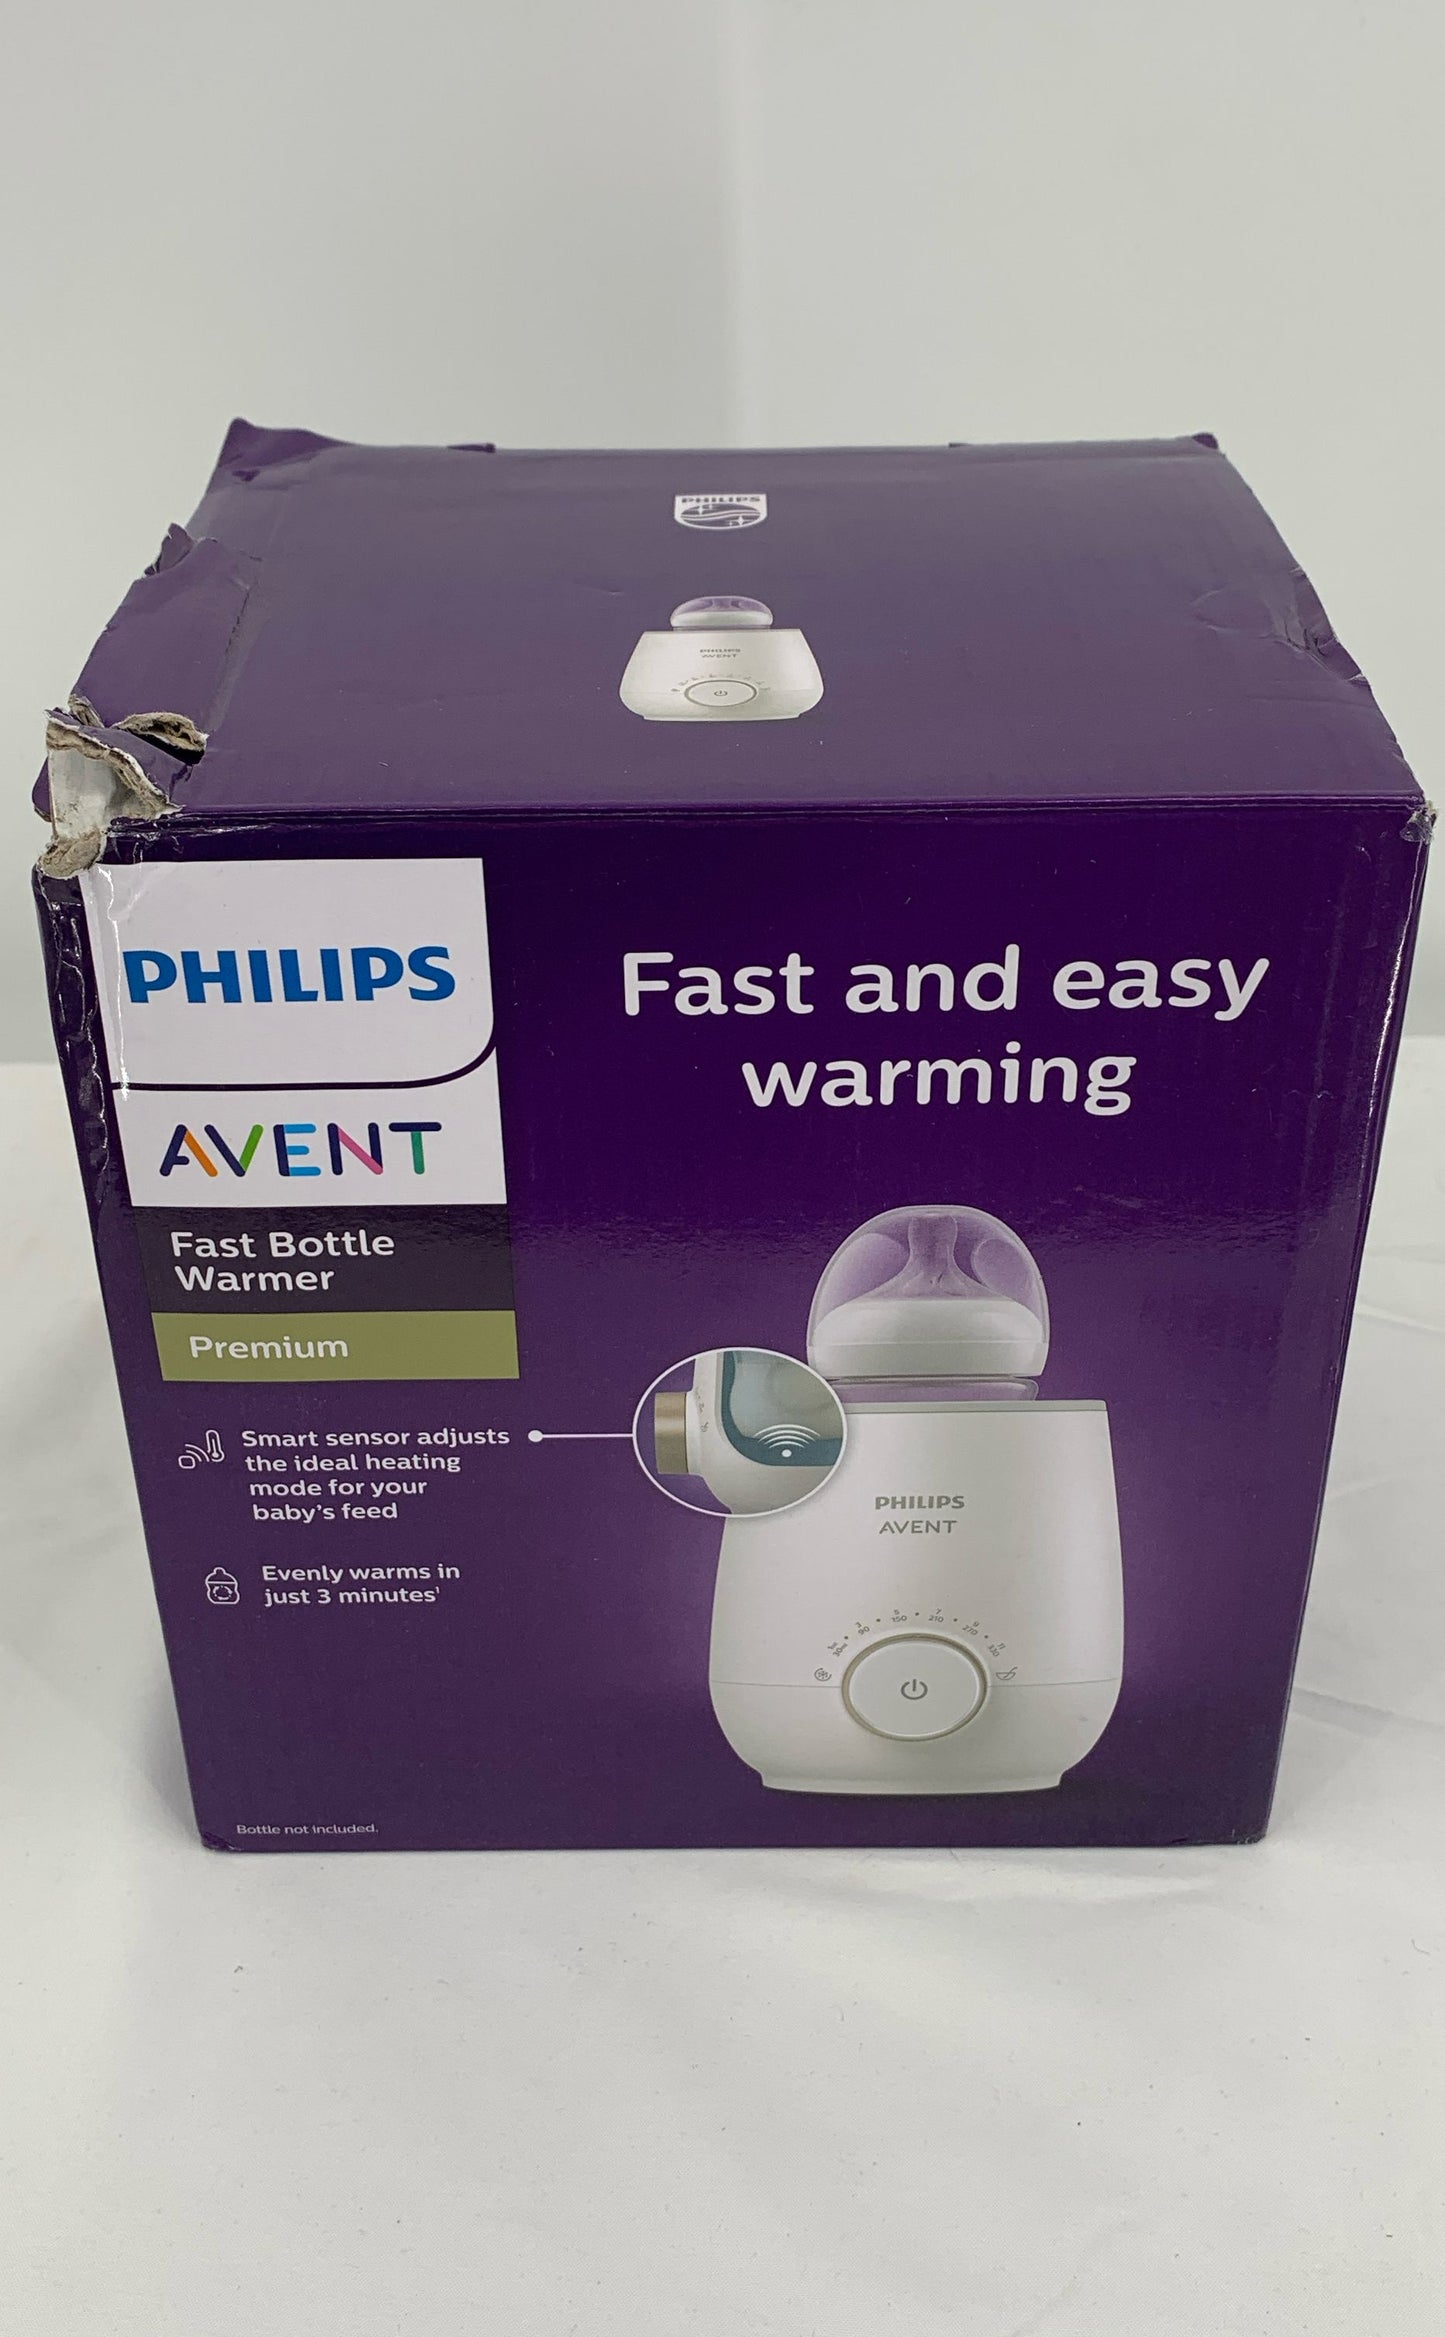 Philips Avent Fast And Easy Warming Fast Bottle Warmer Premium